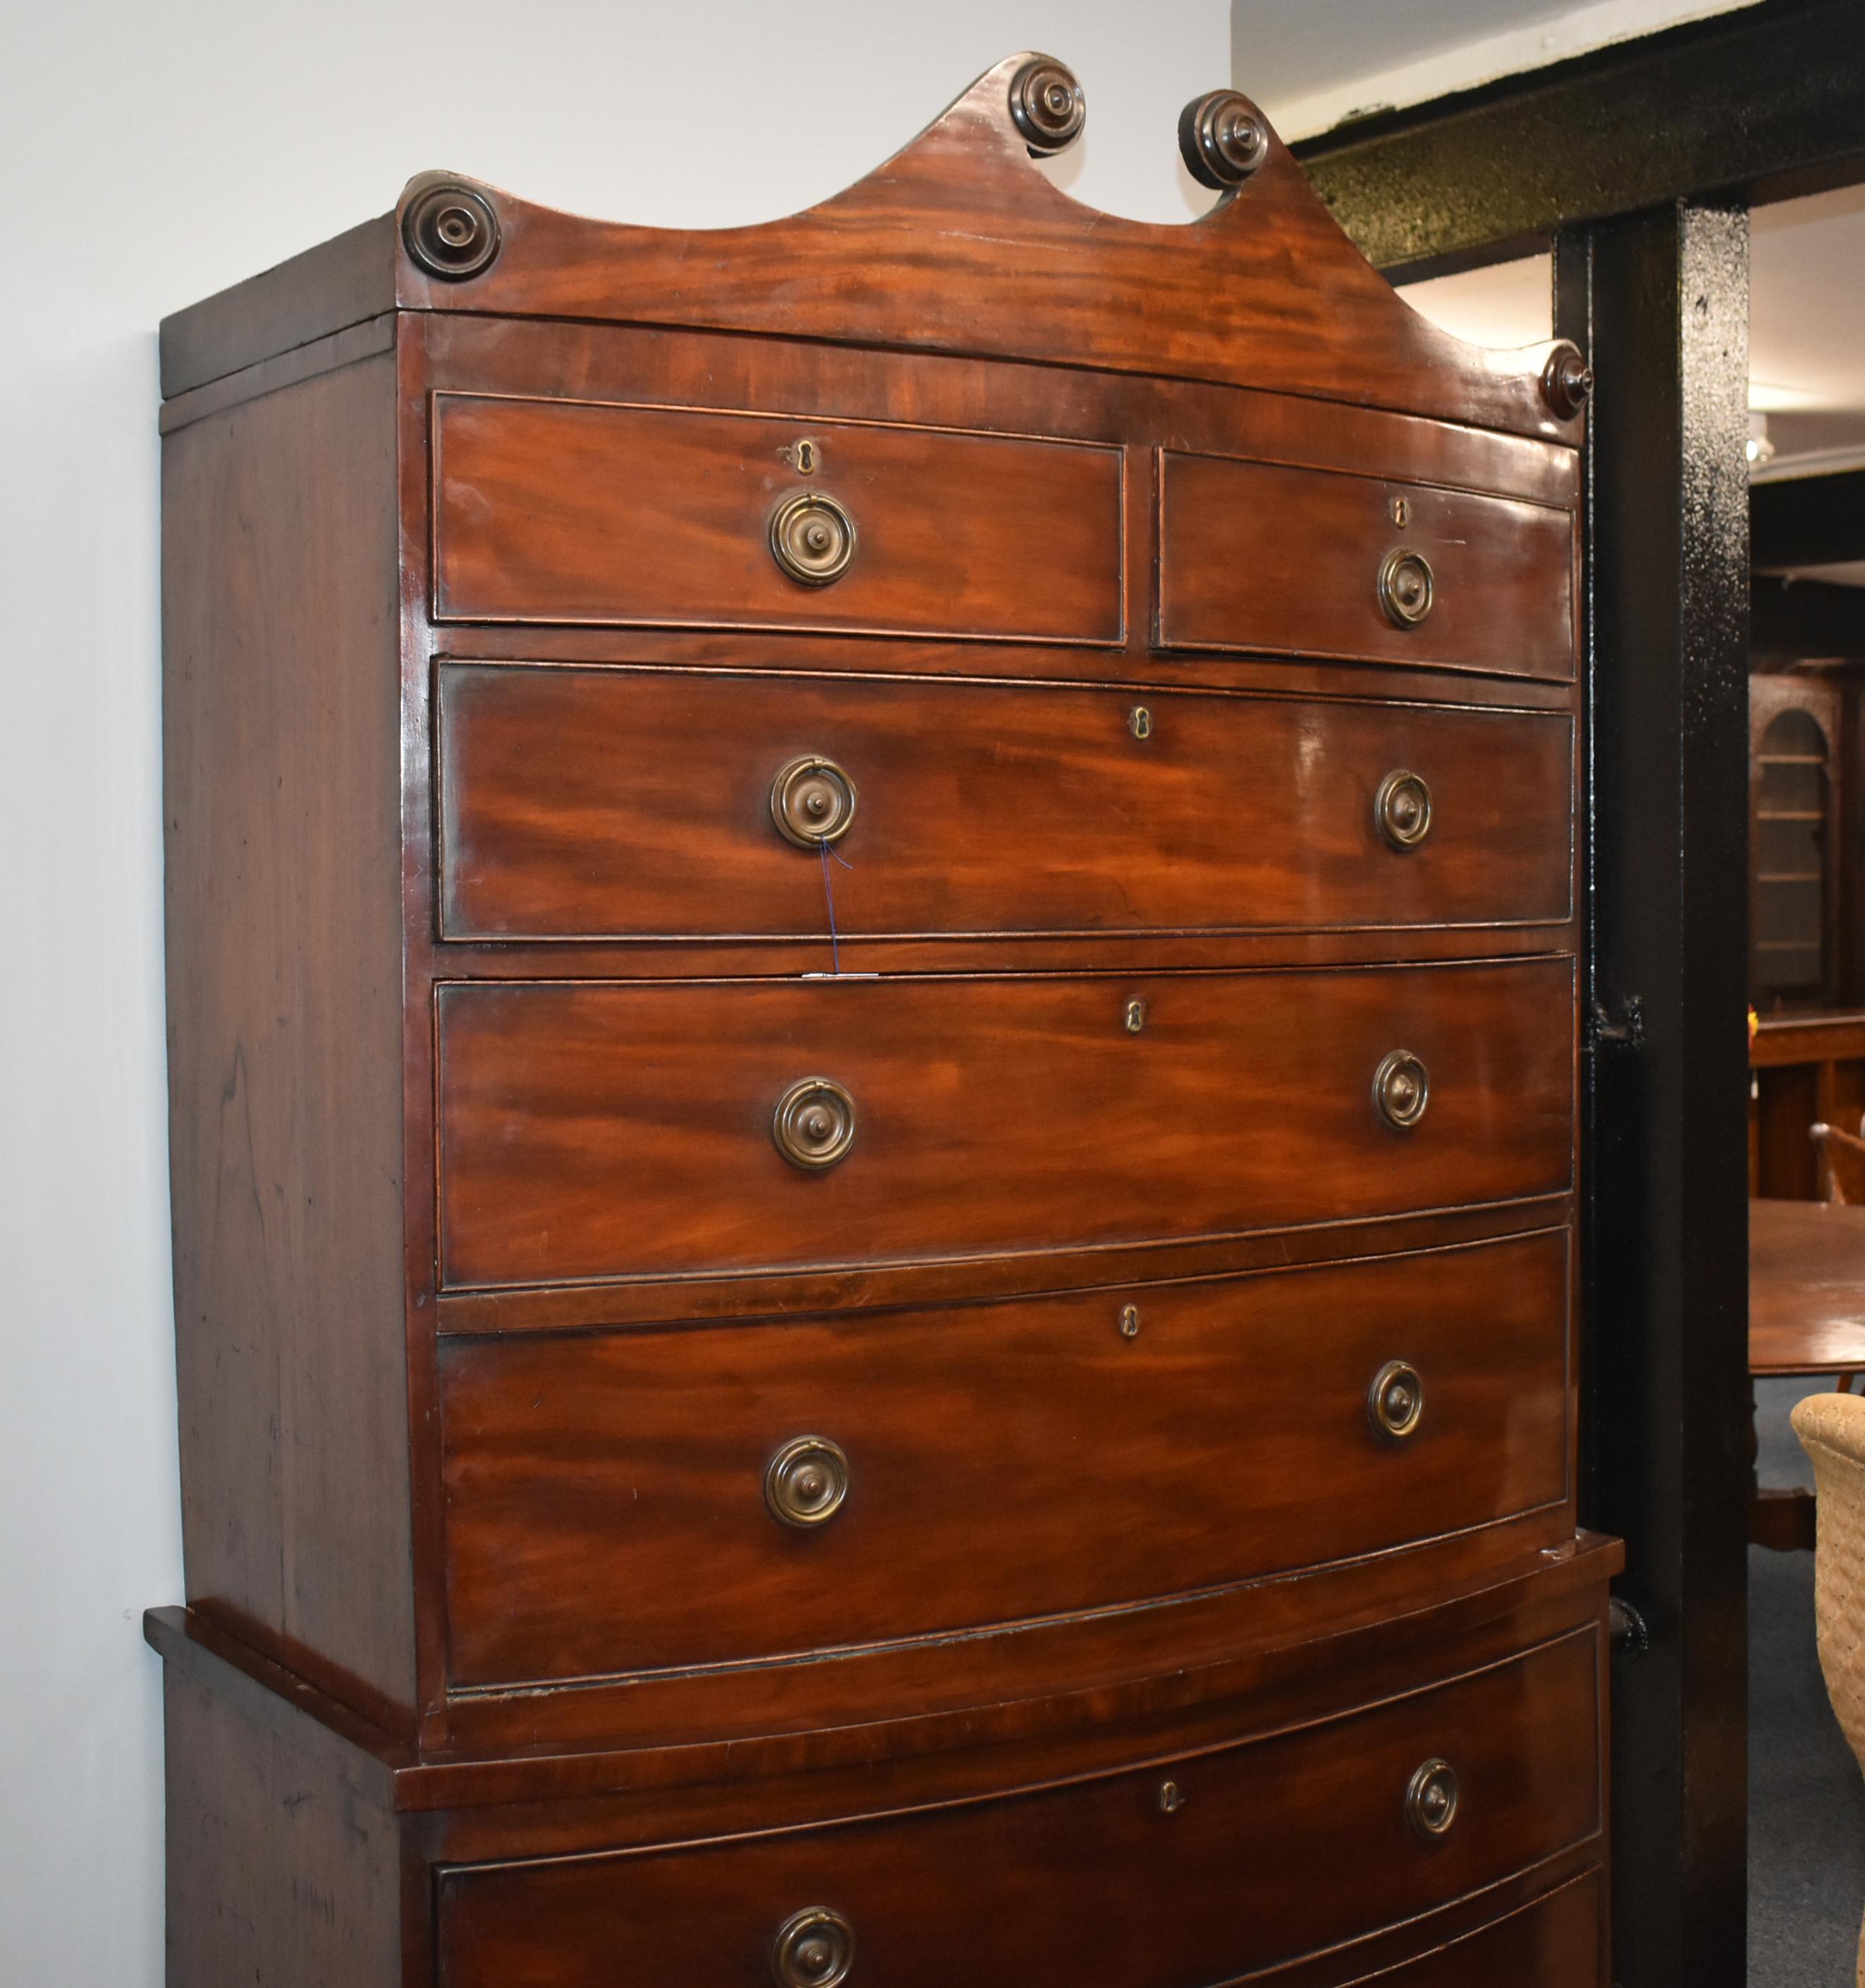 A good quality 19th century George III mahogany bow front chest on chest. The top of the chest has a small arched pediment above an arrangement of five drawers, each with brass escutcheons and brass handles. This fits onto the base chest, which has